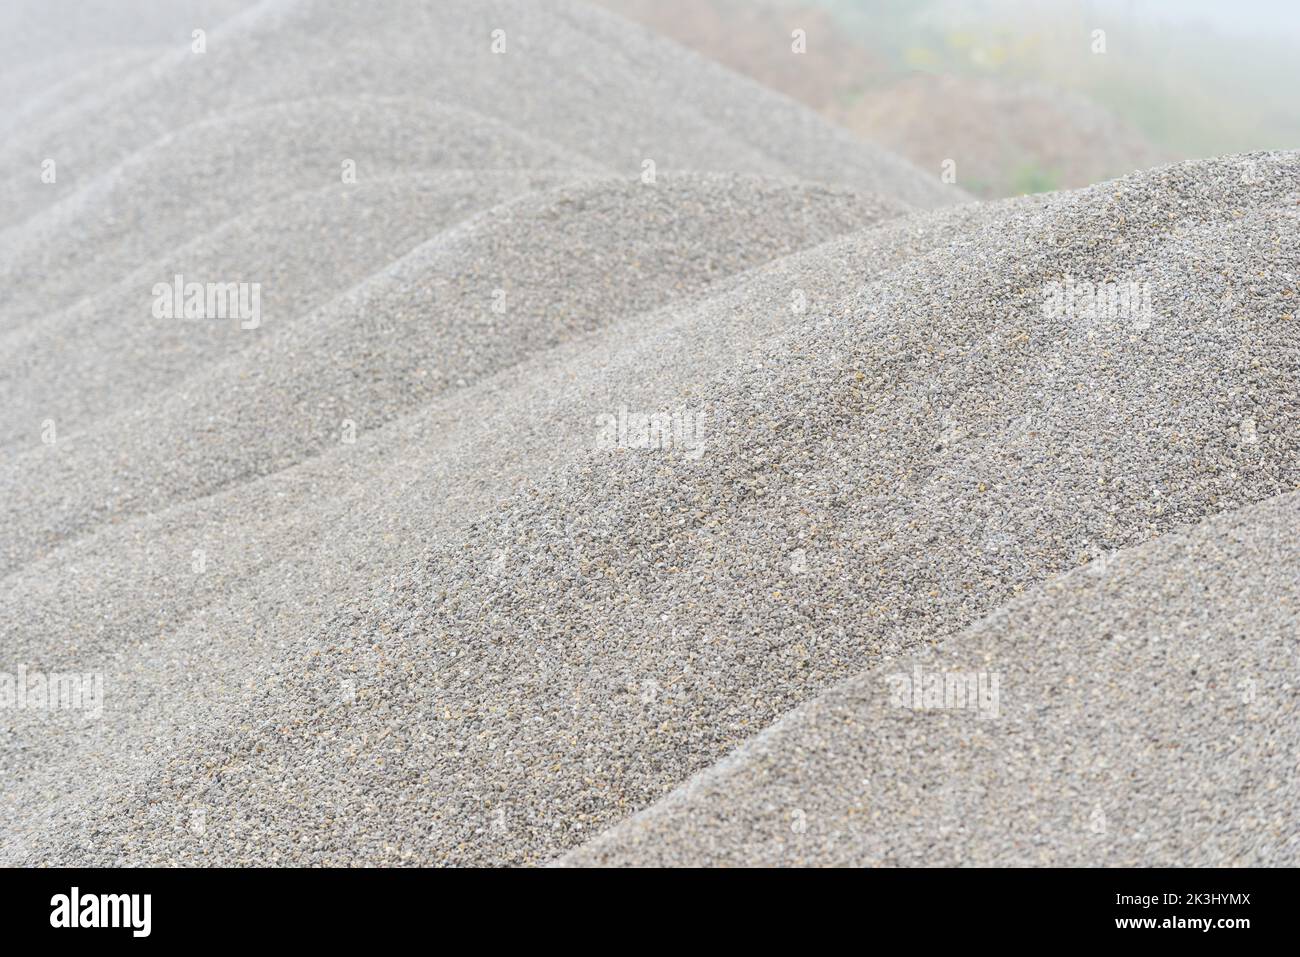 Large pile of gray gravel stone as road construction material as natural background, selective focus Stock Photo